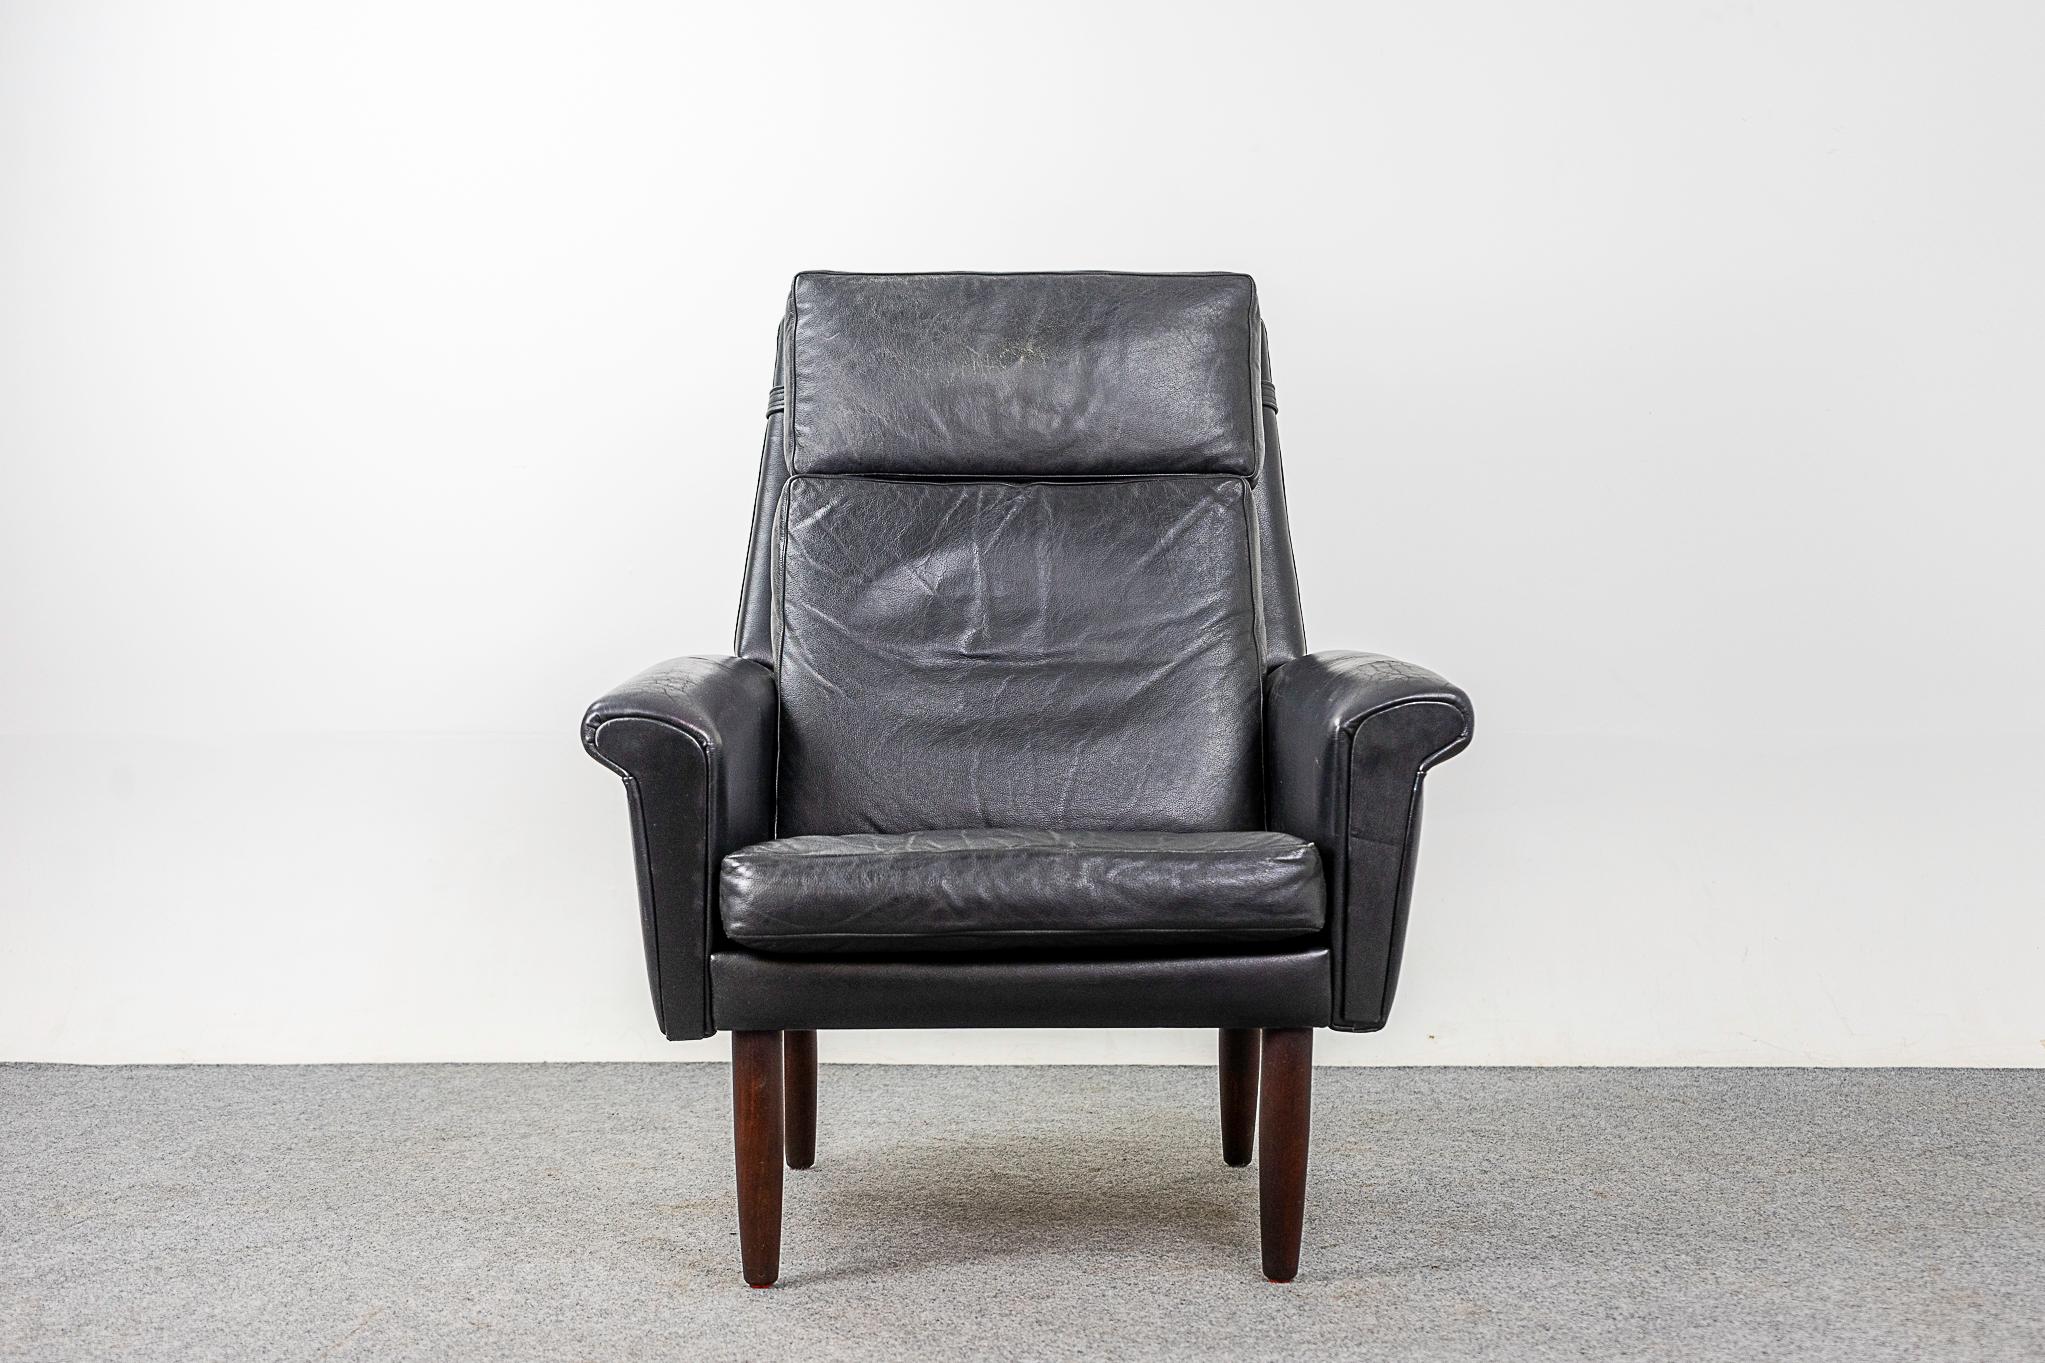 Leather & teak mid-century lounge chair, circa 1960's. Original pitch black soft, supple leather with only minor some marks consistent with age. Sultry angles and solid teak turned legs. High back provides exceptional neck support, a very